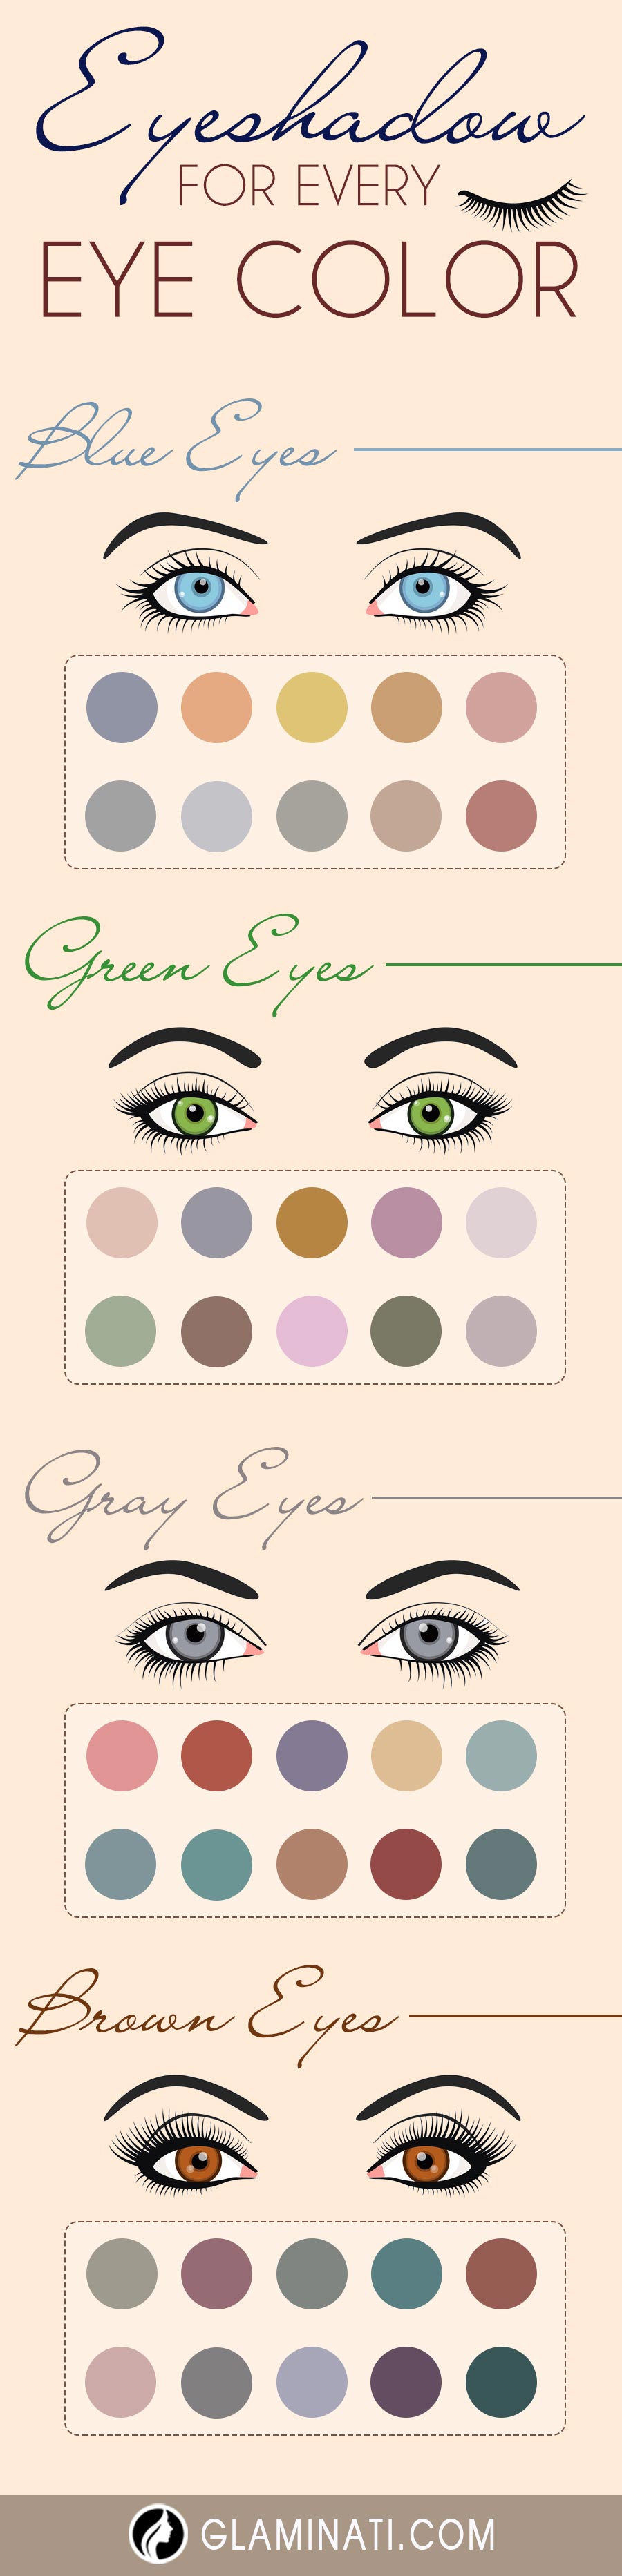 Best Ideas of Makeup for Blue Eyes